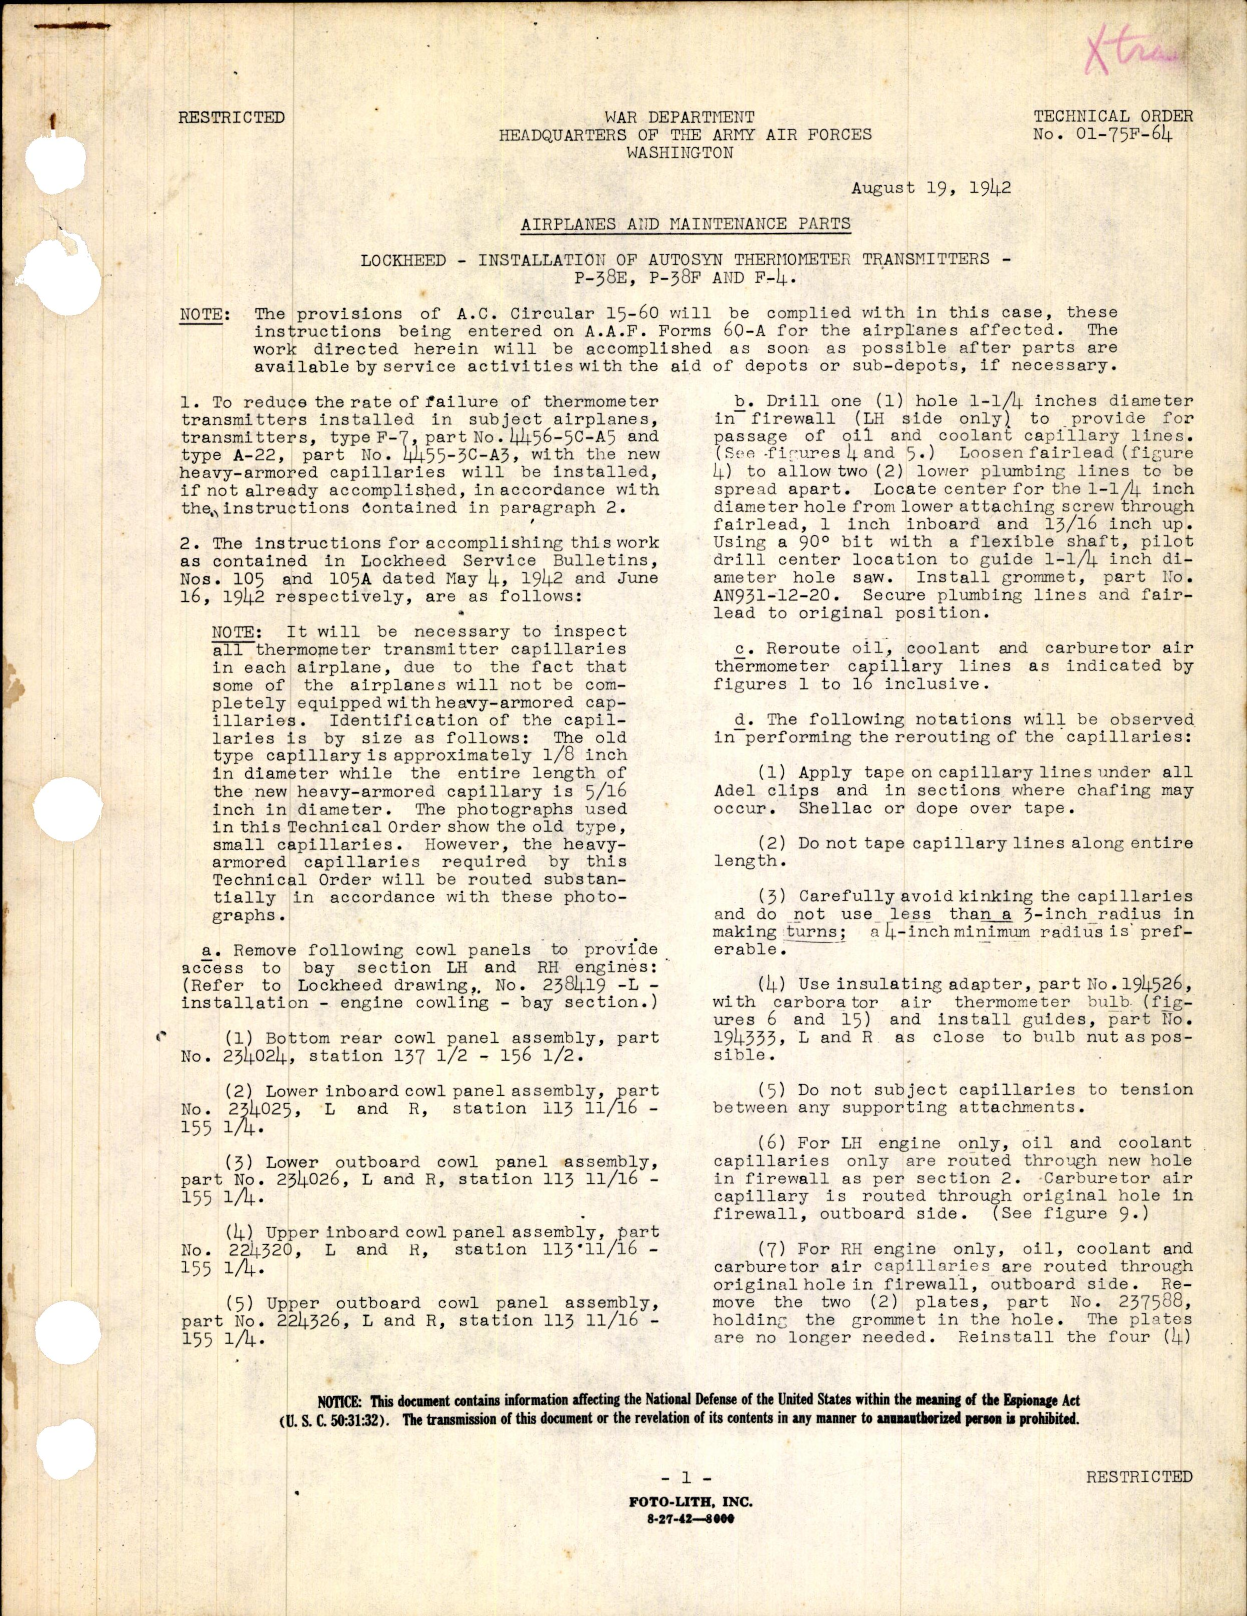 Sample page 1 from AirCorps Library document: Installation of Autosyn Thermometer Transmitters for P-38E, P-38F, and F-4